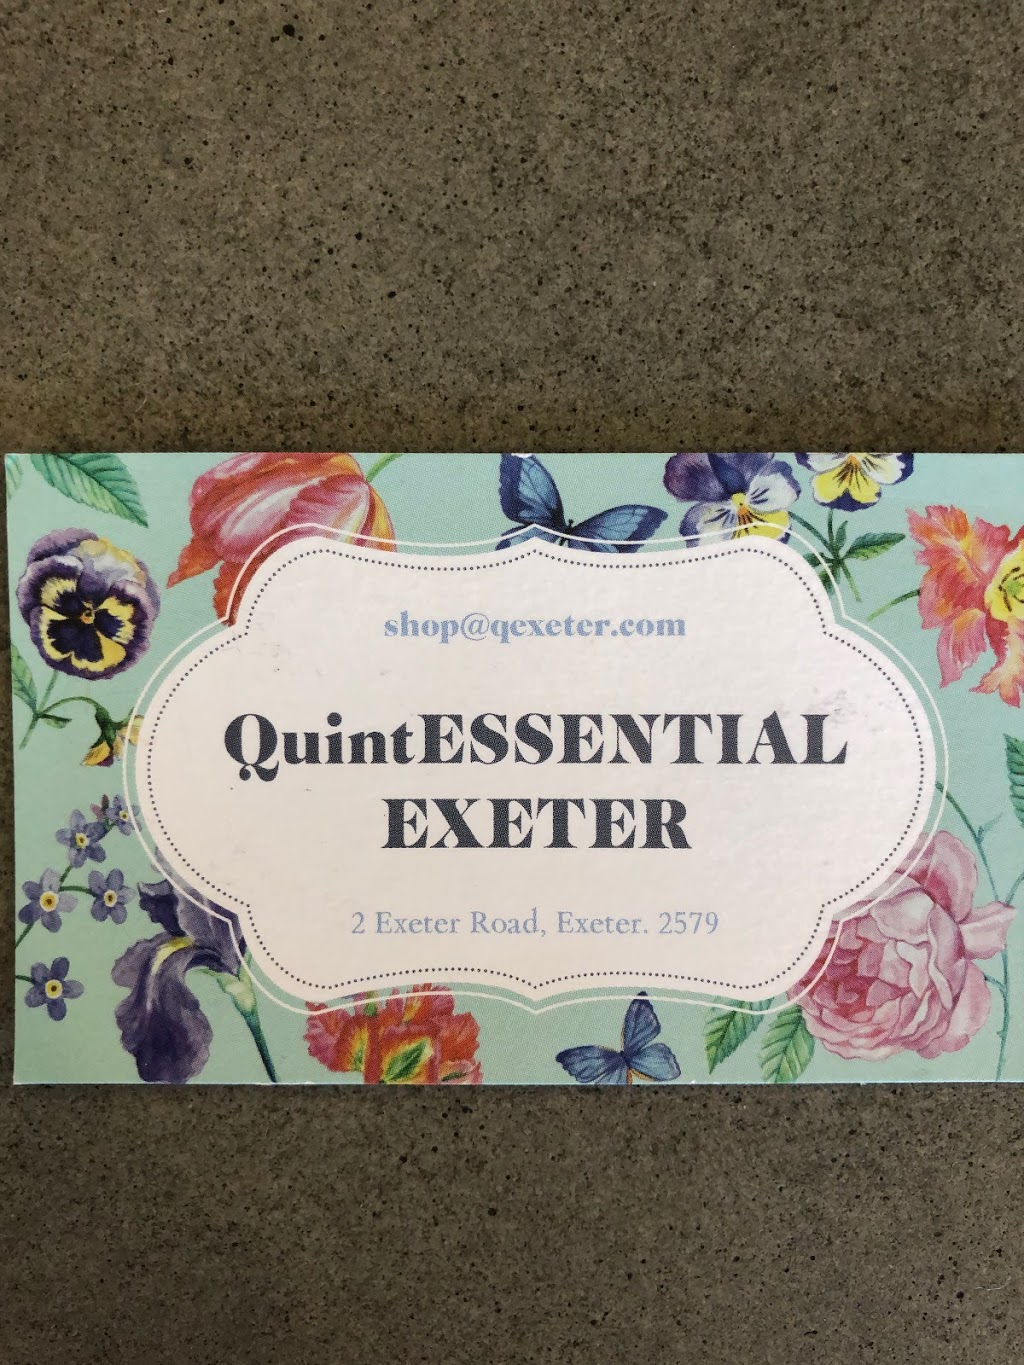 Quintessential Exeter | clothing store | 2 Exeter Rd, Exeter NSW 2579, Australia | 0412624222 OR +61 412 624 222